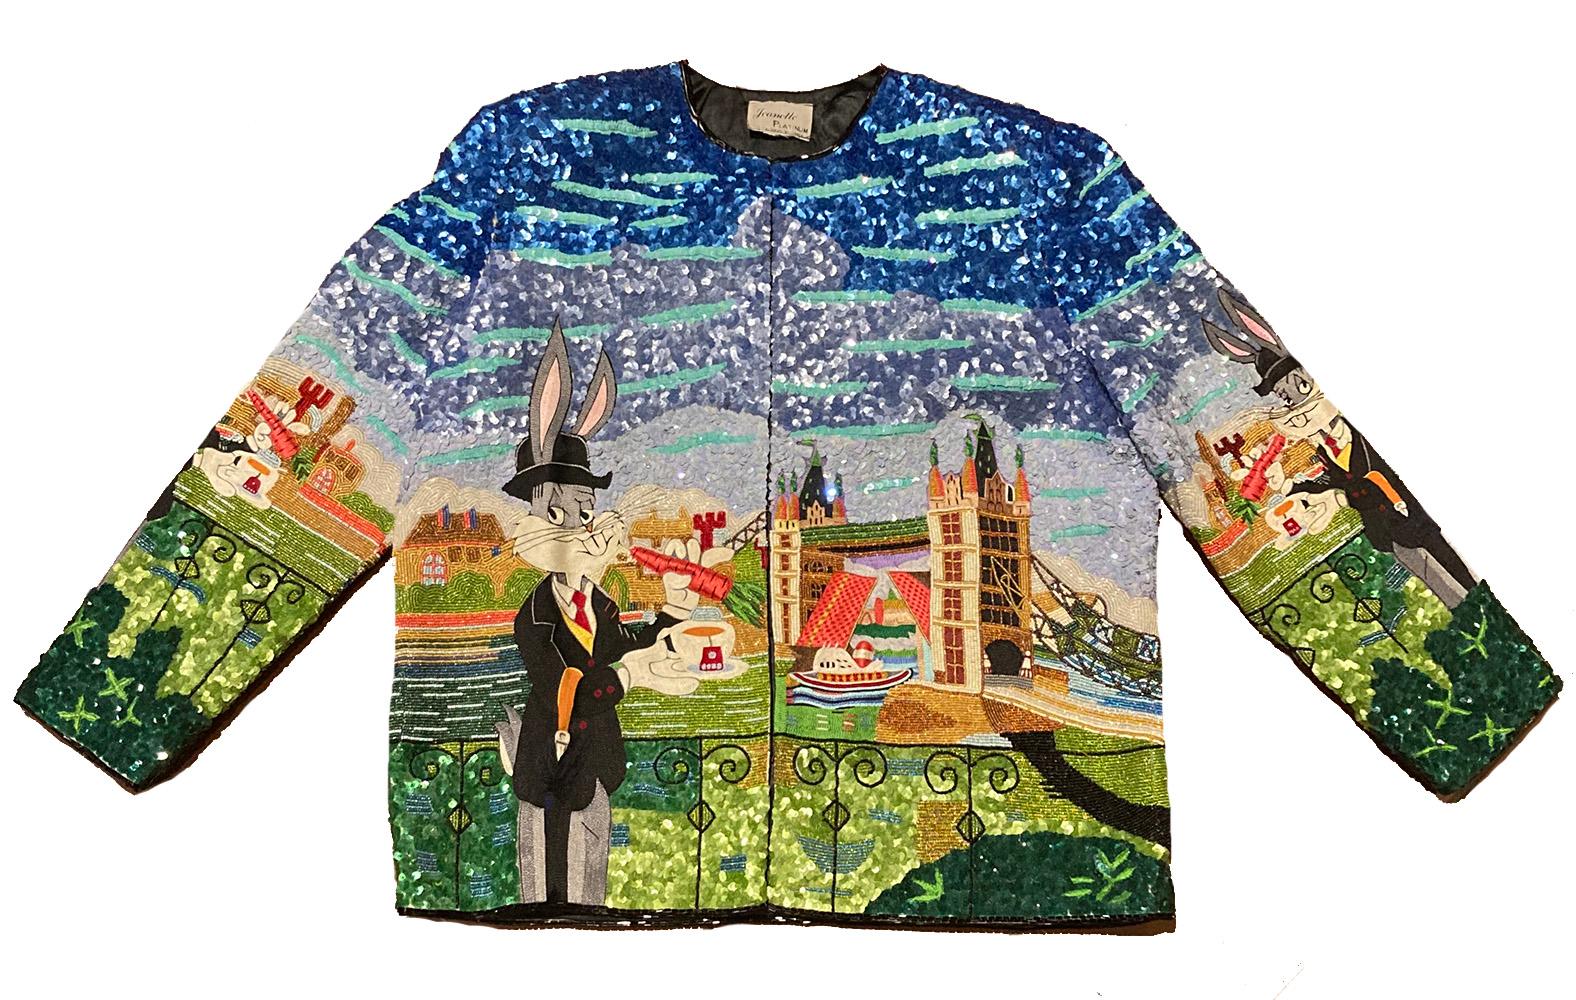 This is a one-of-a-kind find from Jeanette Kastenberg aka Jeanette Platinum. Vintage c1993 hand beaded and sequined Looney tunes bugs bunny london bridge scene. Multi colored beaded and sequined outer with embroidered Bugs Bunny standing on a